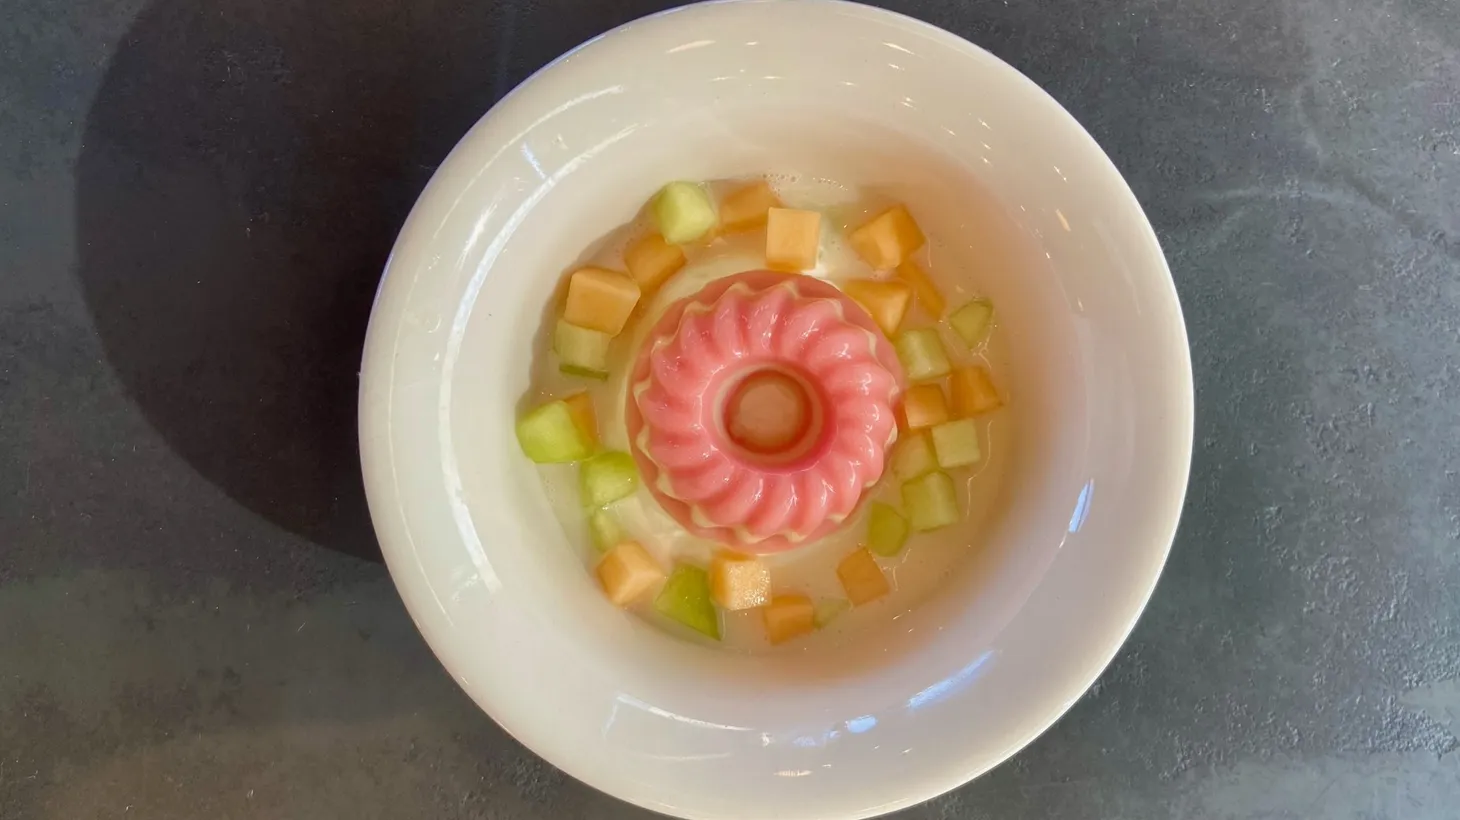 Erika Chan says her watermelon gelatin dessert at Dunsmoor is easy to make at home.